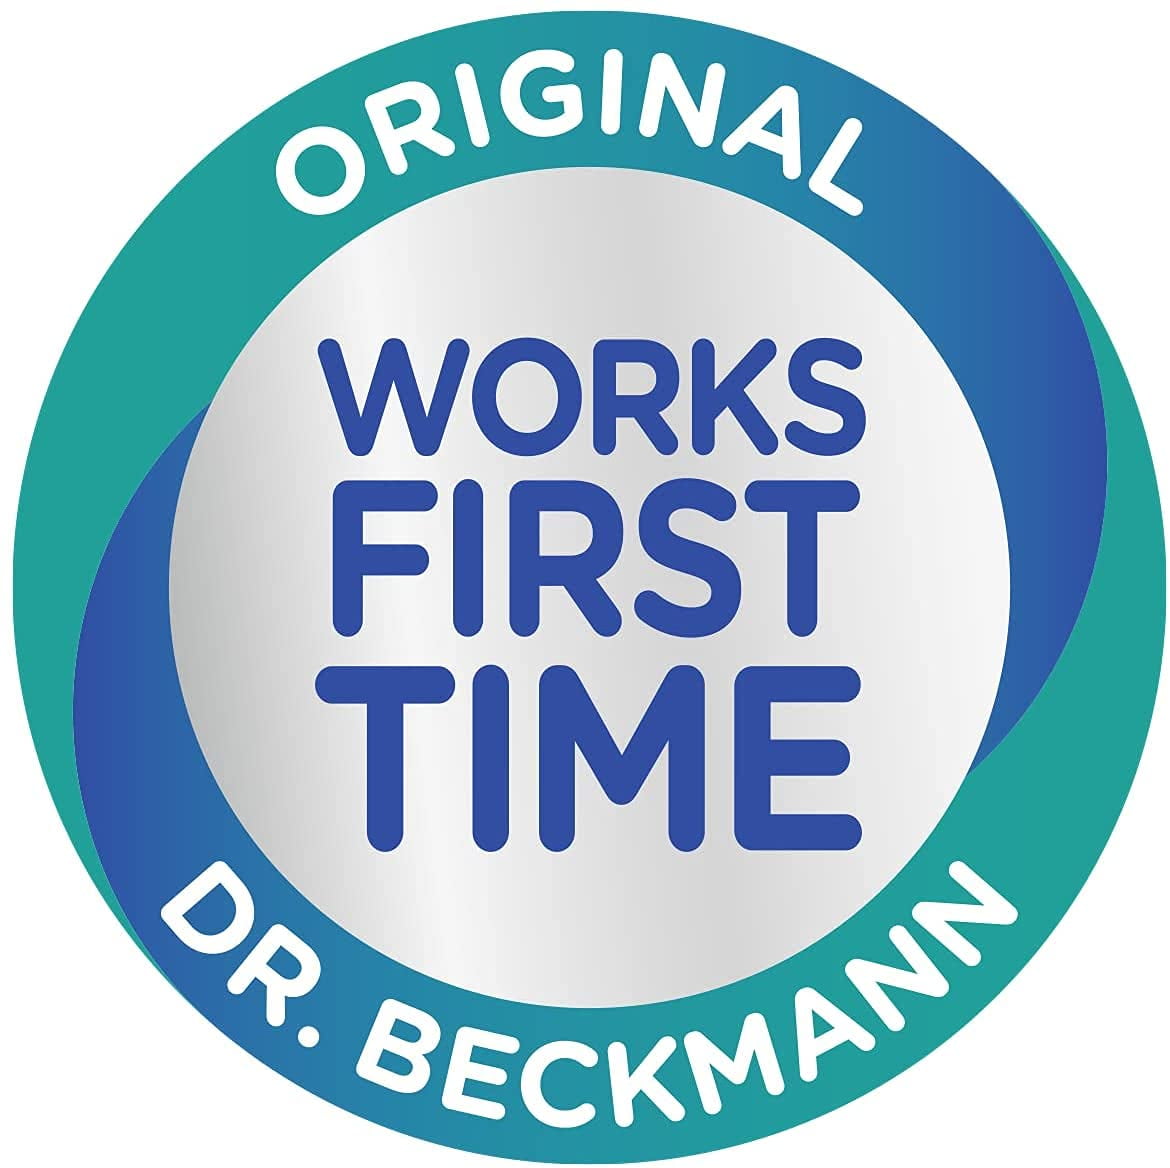 Dr. Beckmann products » Compare prices and see offers now